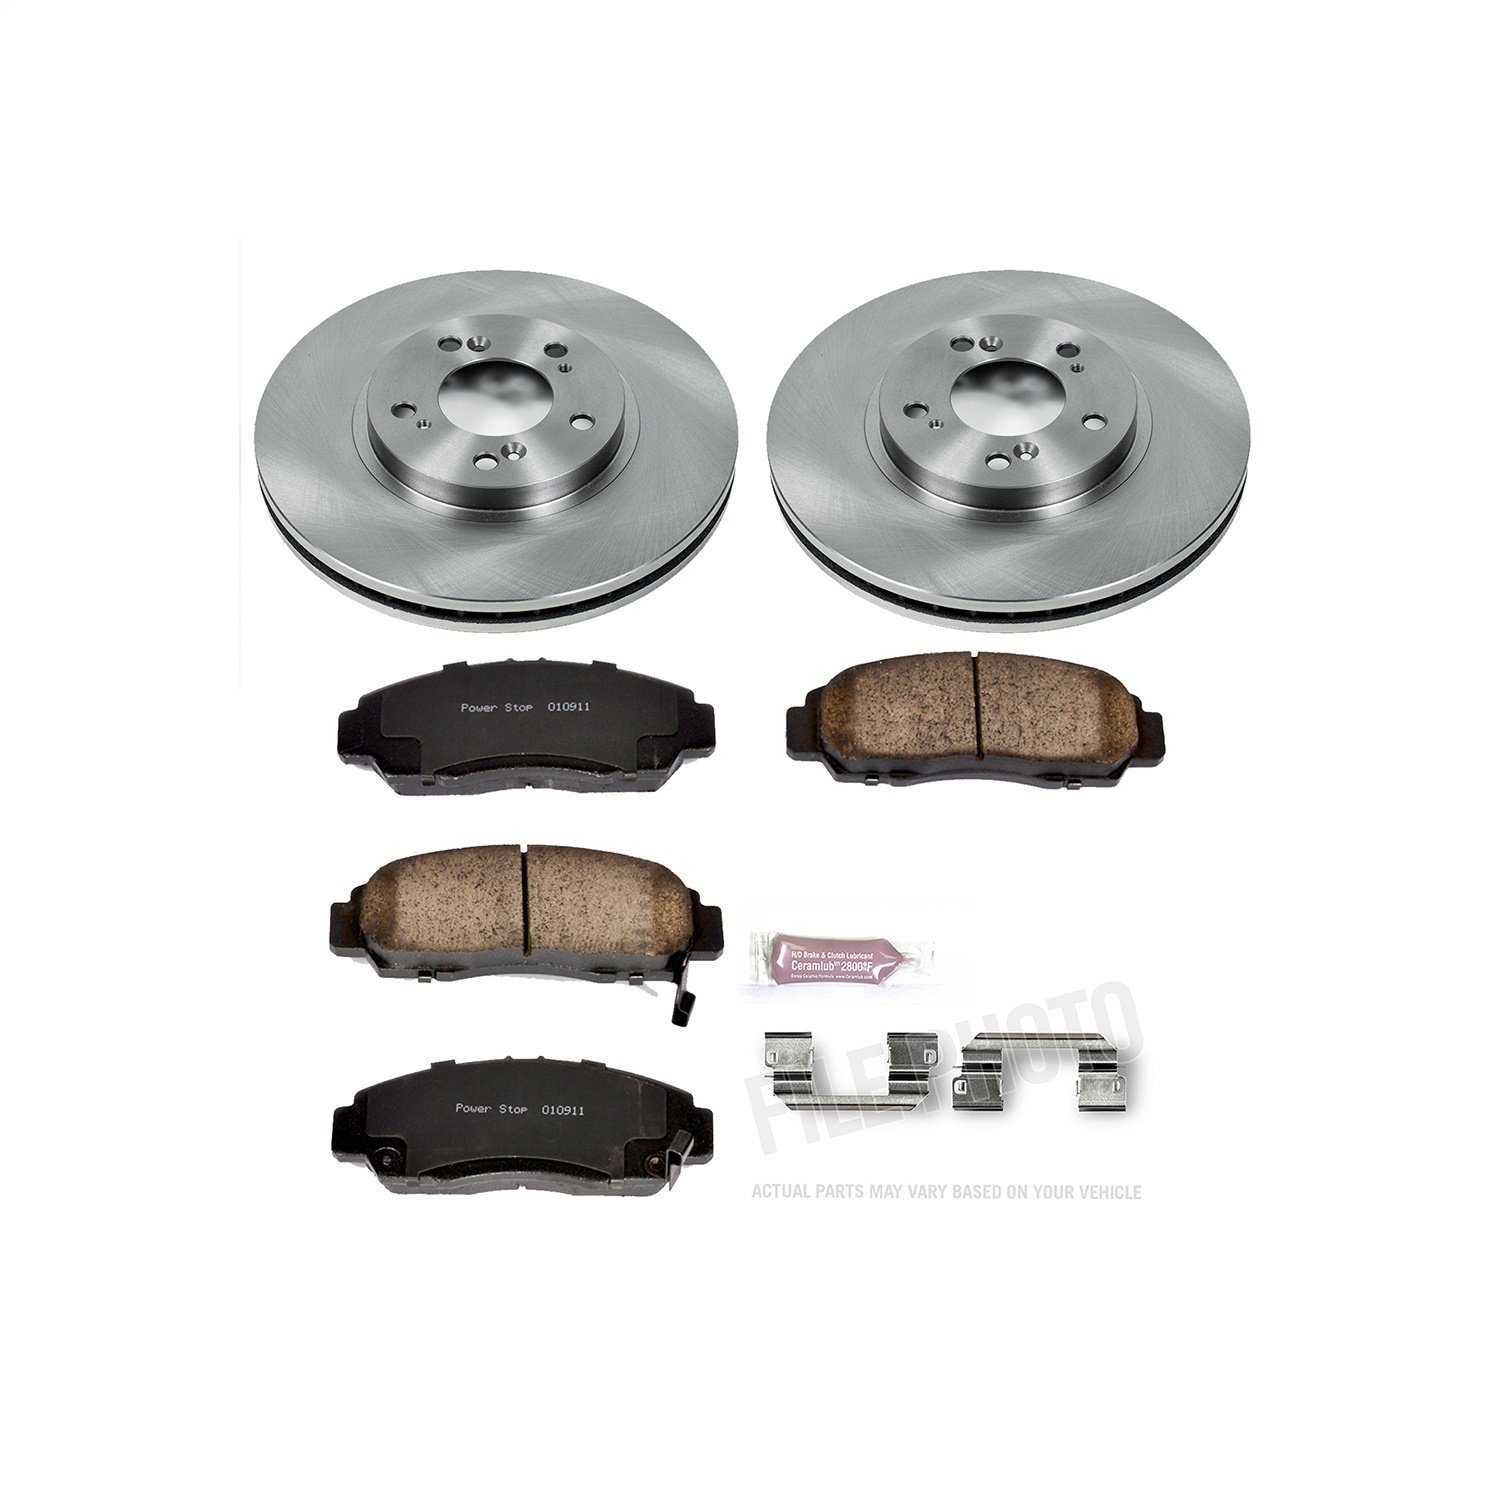 1-Click Daily Driver Brake Kits Front OE Replacement Rotors Z16 Ceramic Scorched Brake Pads